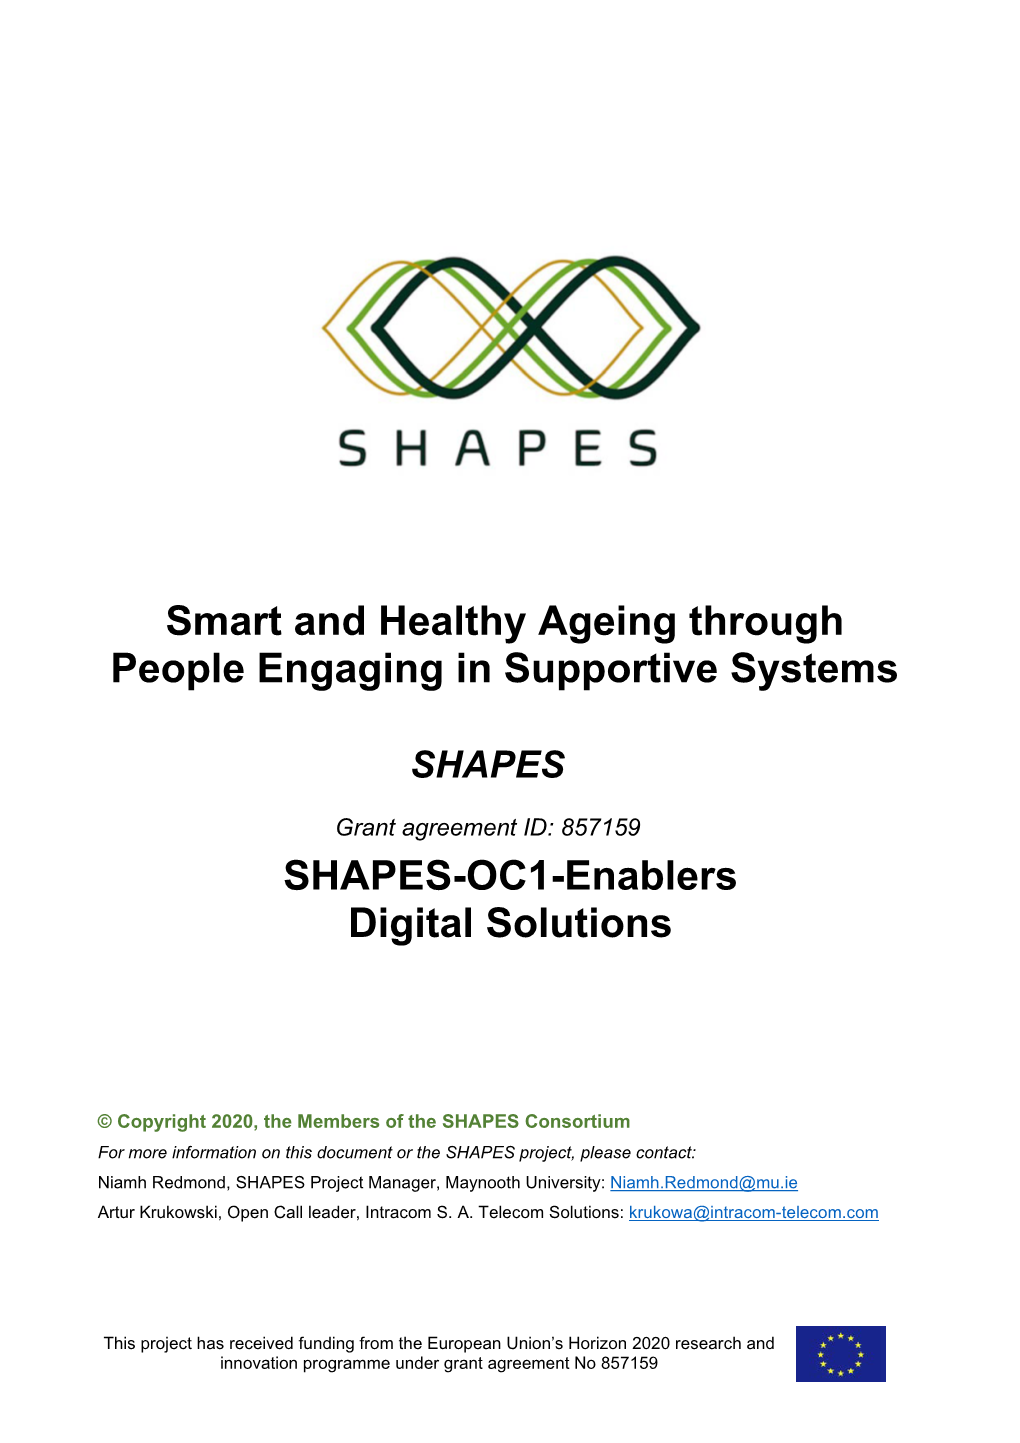 Smart and Healthy Ageing Through People Engaging in Supportive Systems